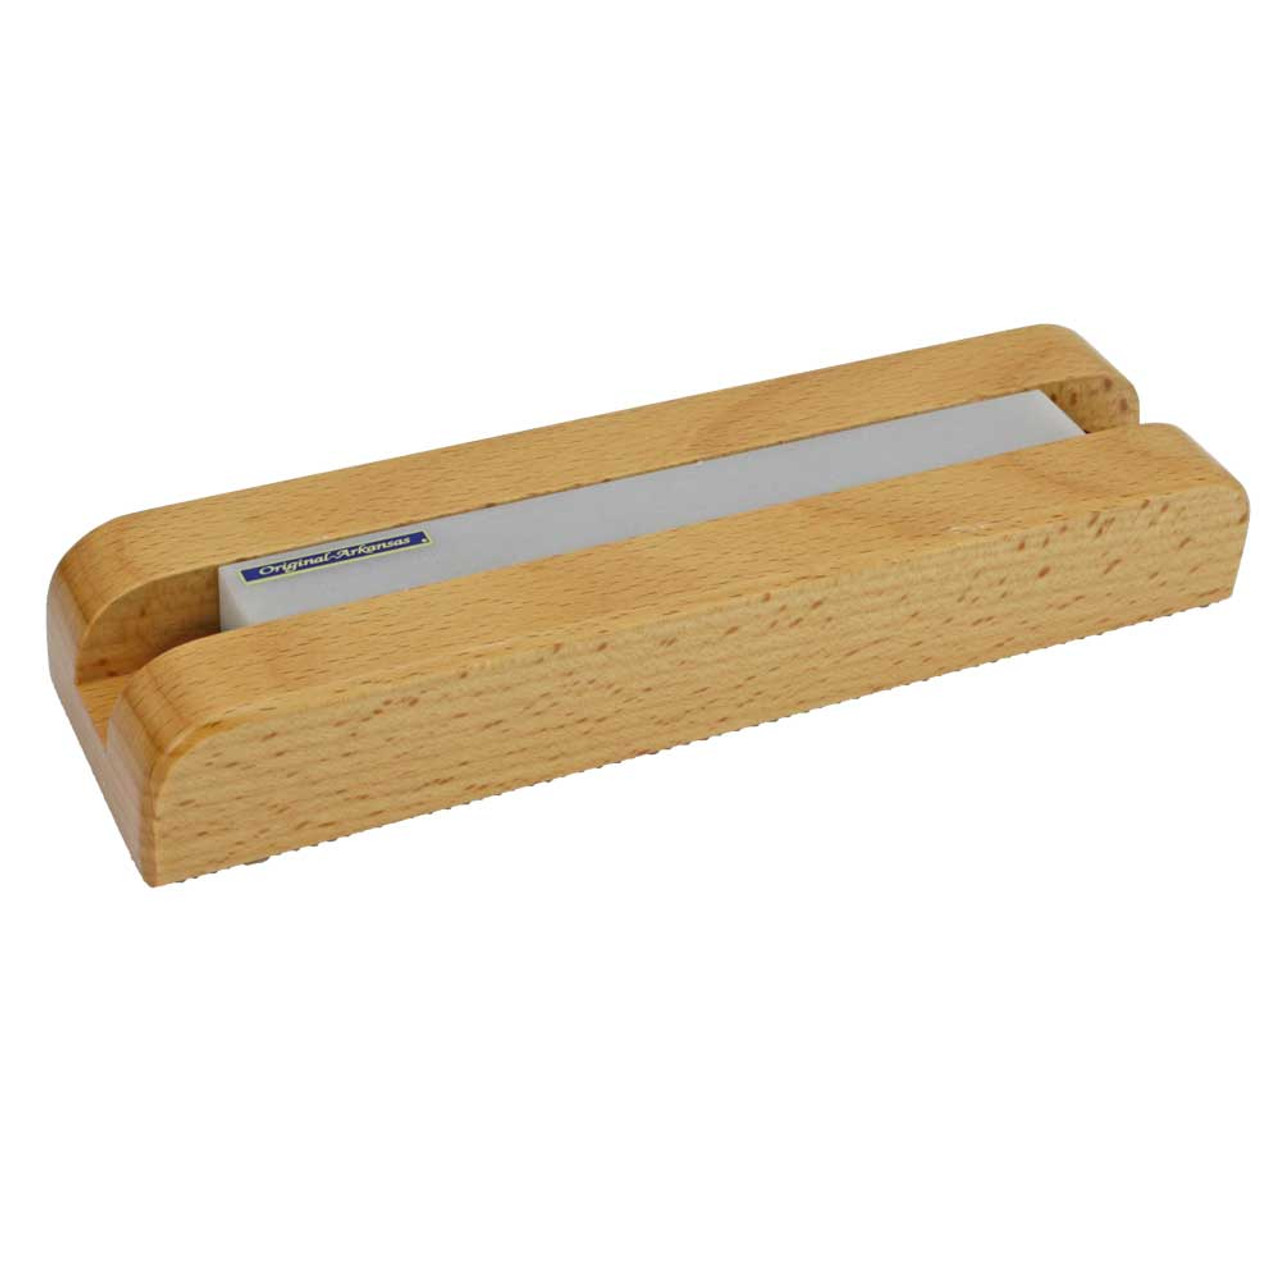 Arkansas Stone for Sharpening Screwdriver with Wooden Base